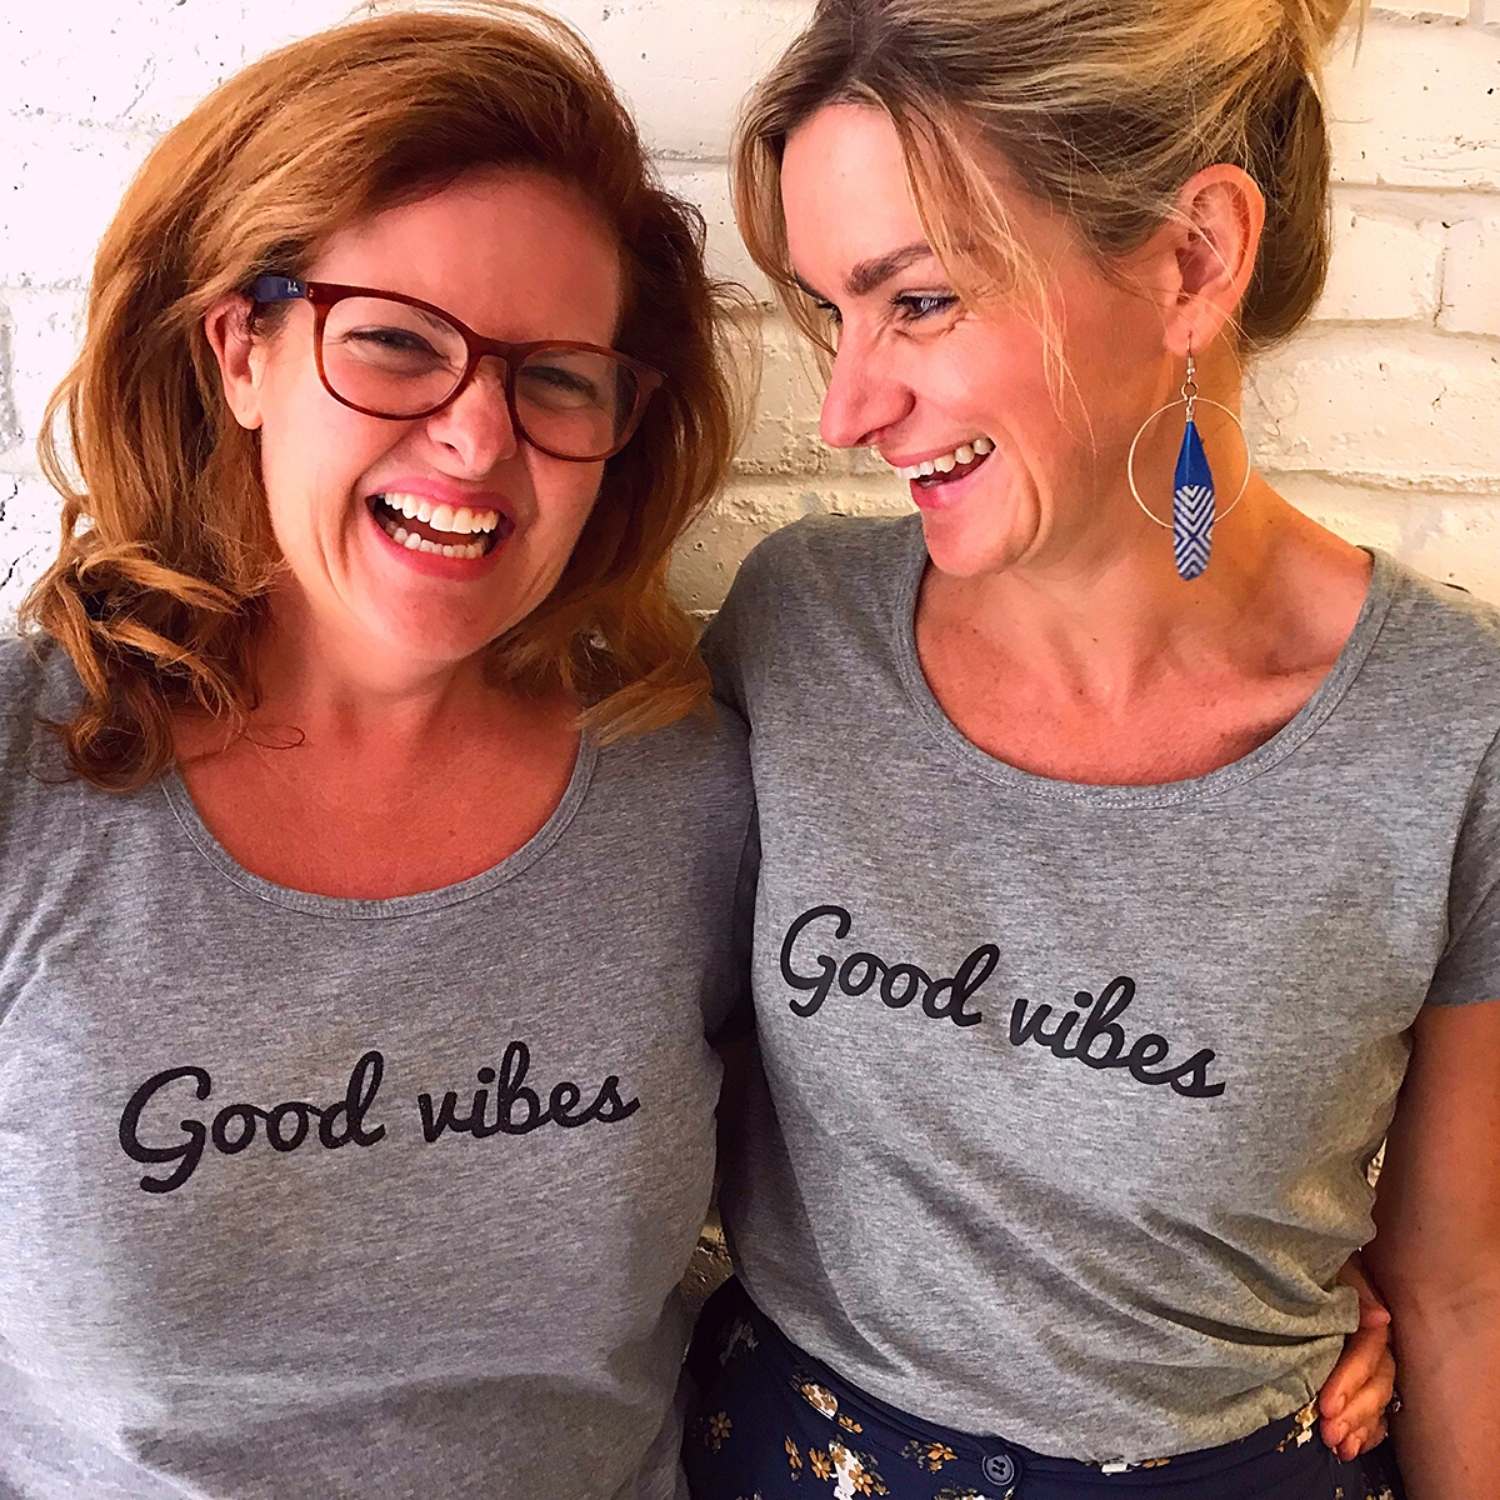 Good Vibes with Gillian & Carolyn fromChampagne Cartel